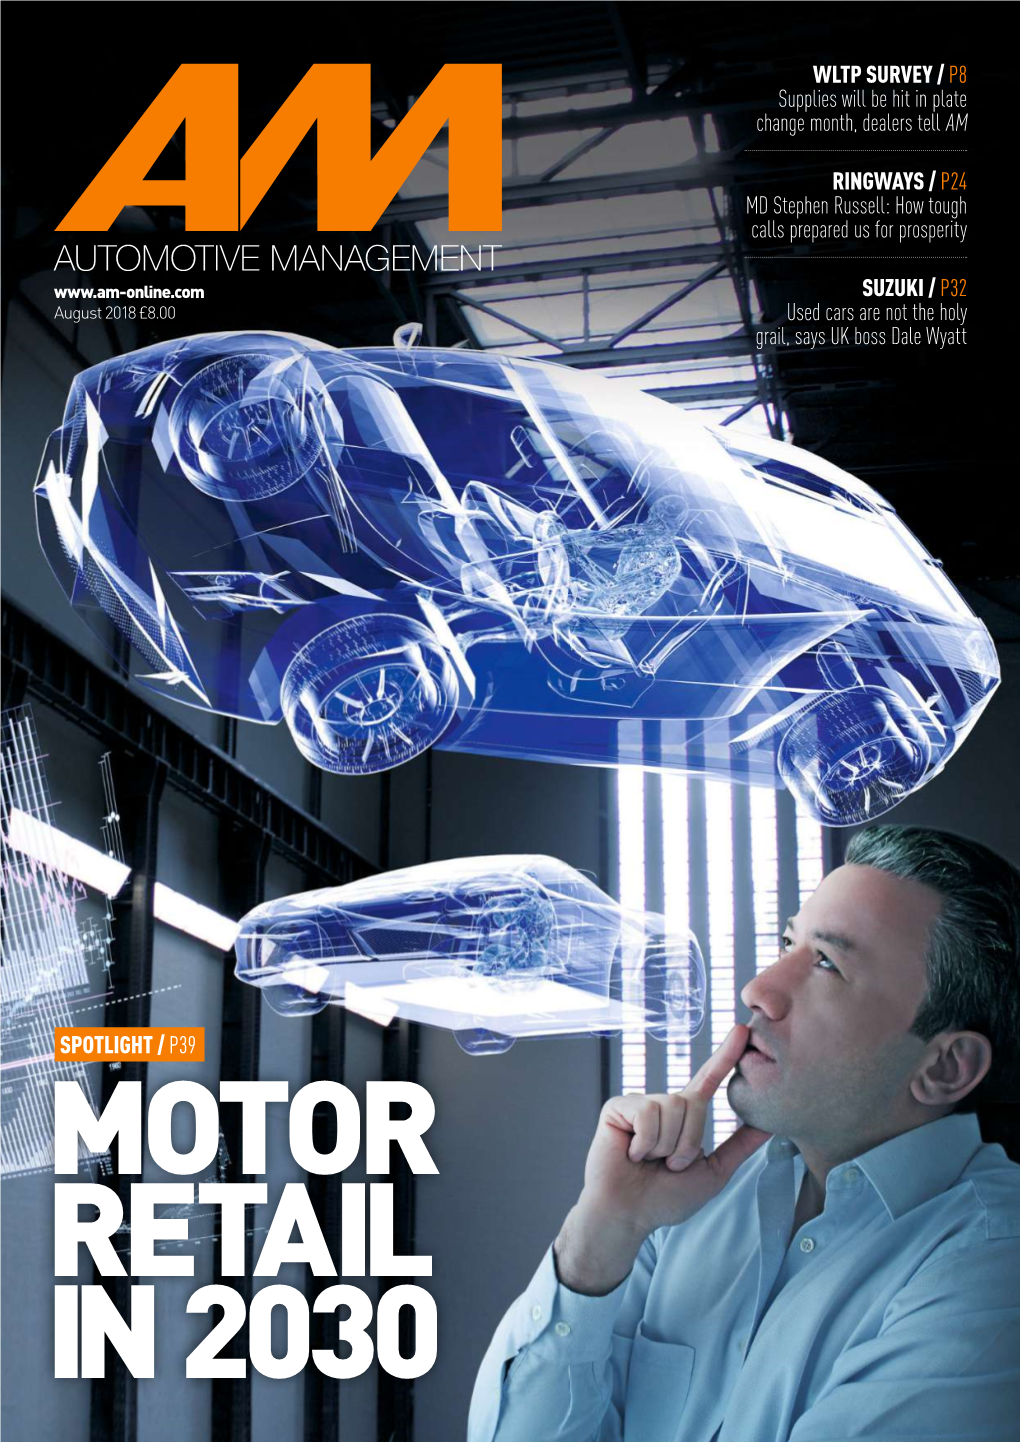 AUTOMOTIVE MANAGEMENT SUZUKI / P32 August 2018 £8.00 Used Cars Are Not the Holy Grail, Says UK Boss Dale Wyatt